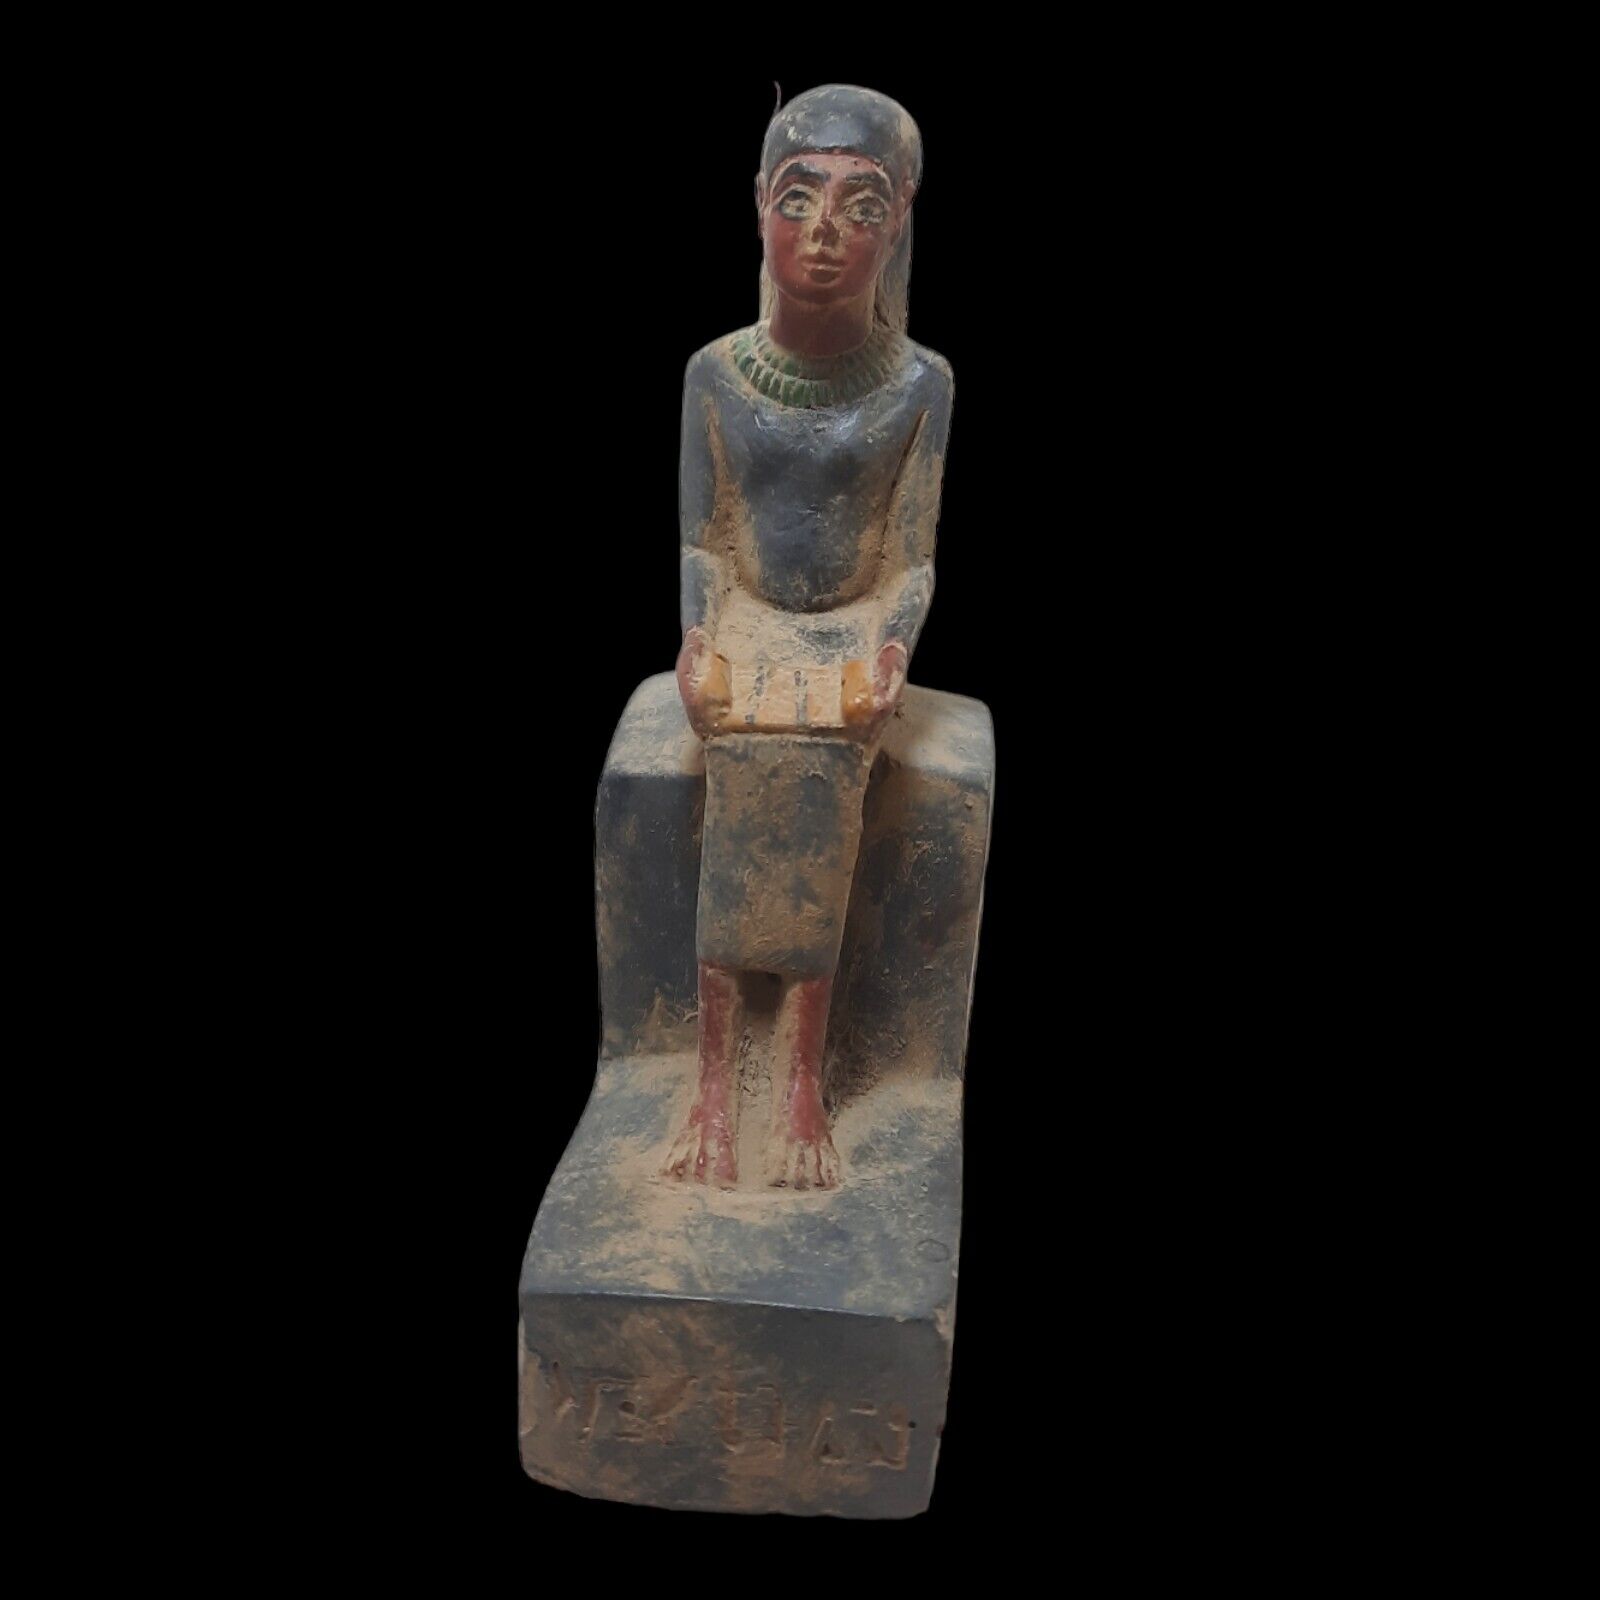 UNIQUE ANCIENT EGYPTIAN STATUE Engineer Imhotep the Builder of Step Pyramid